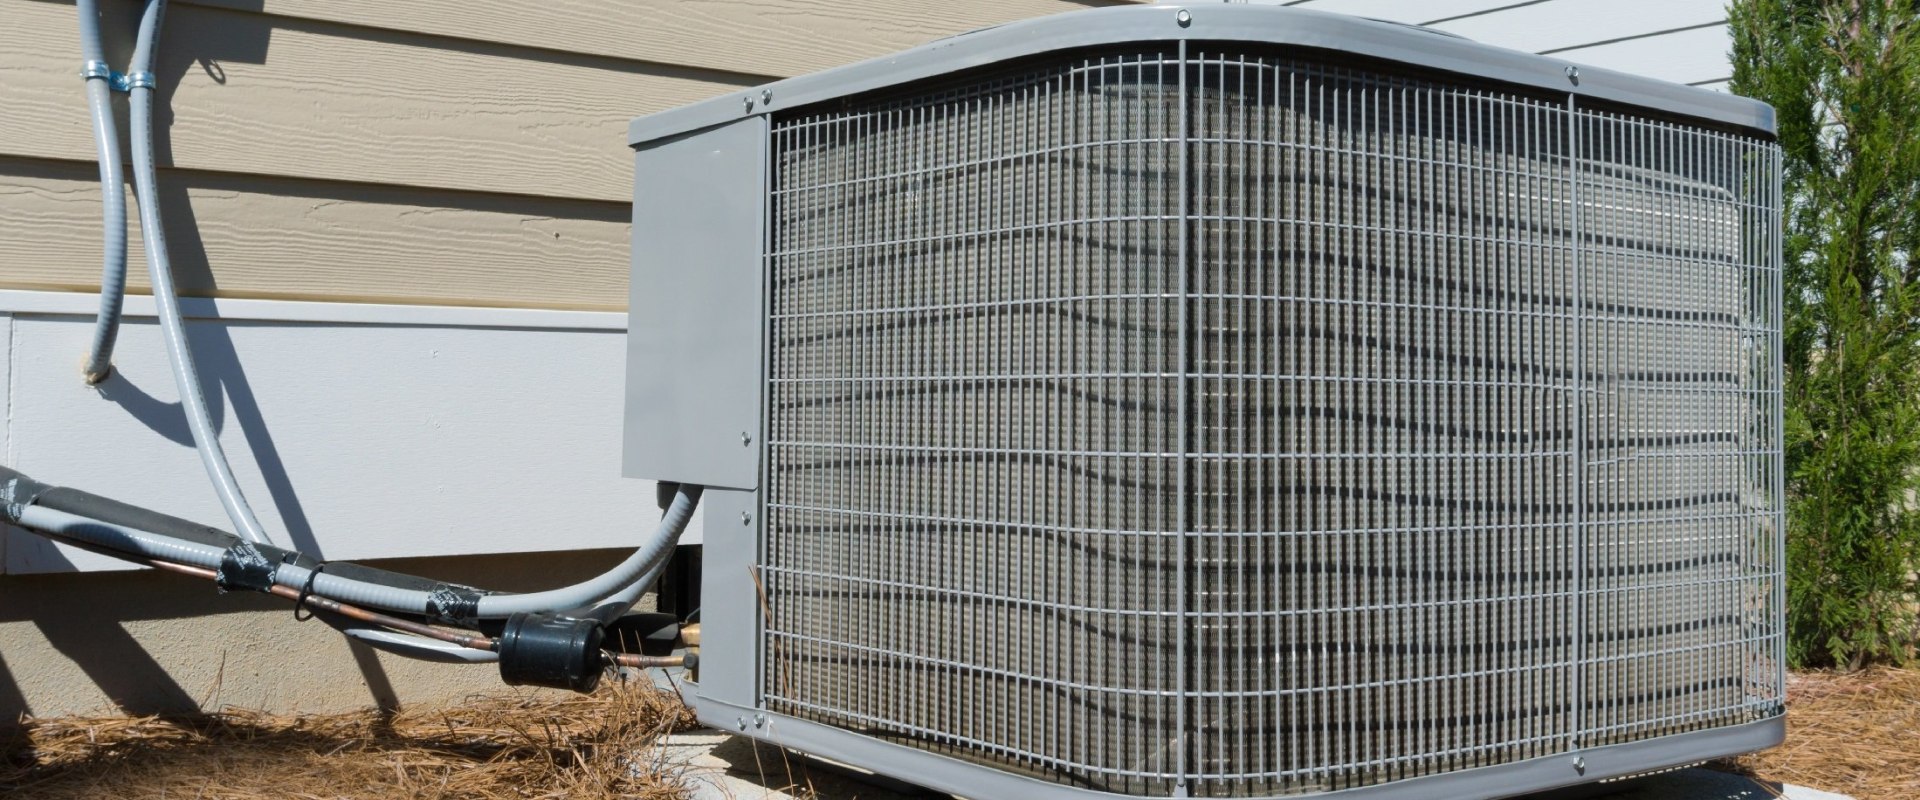 10 Signs You Need to Replace Your AC Unit Now